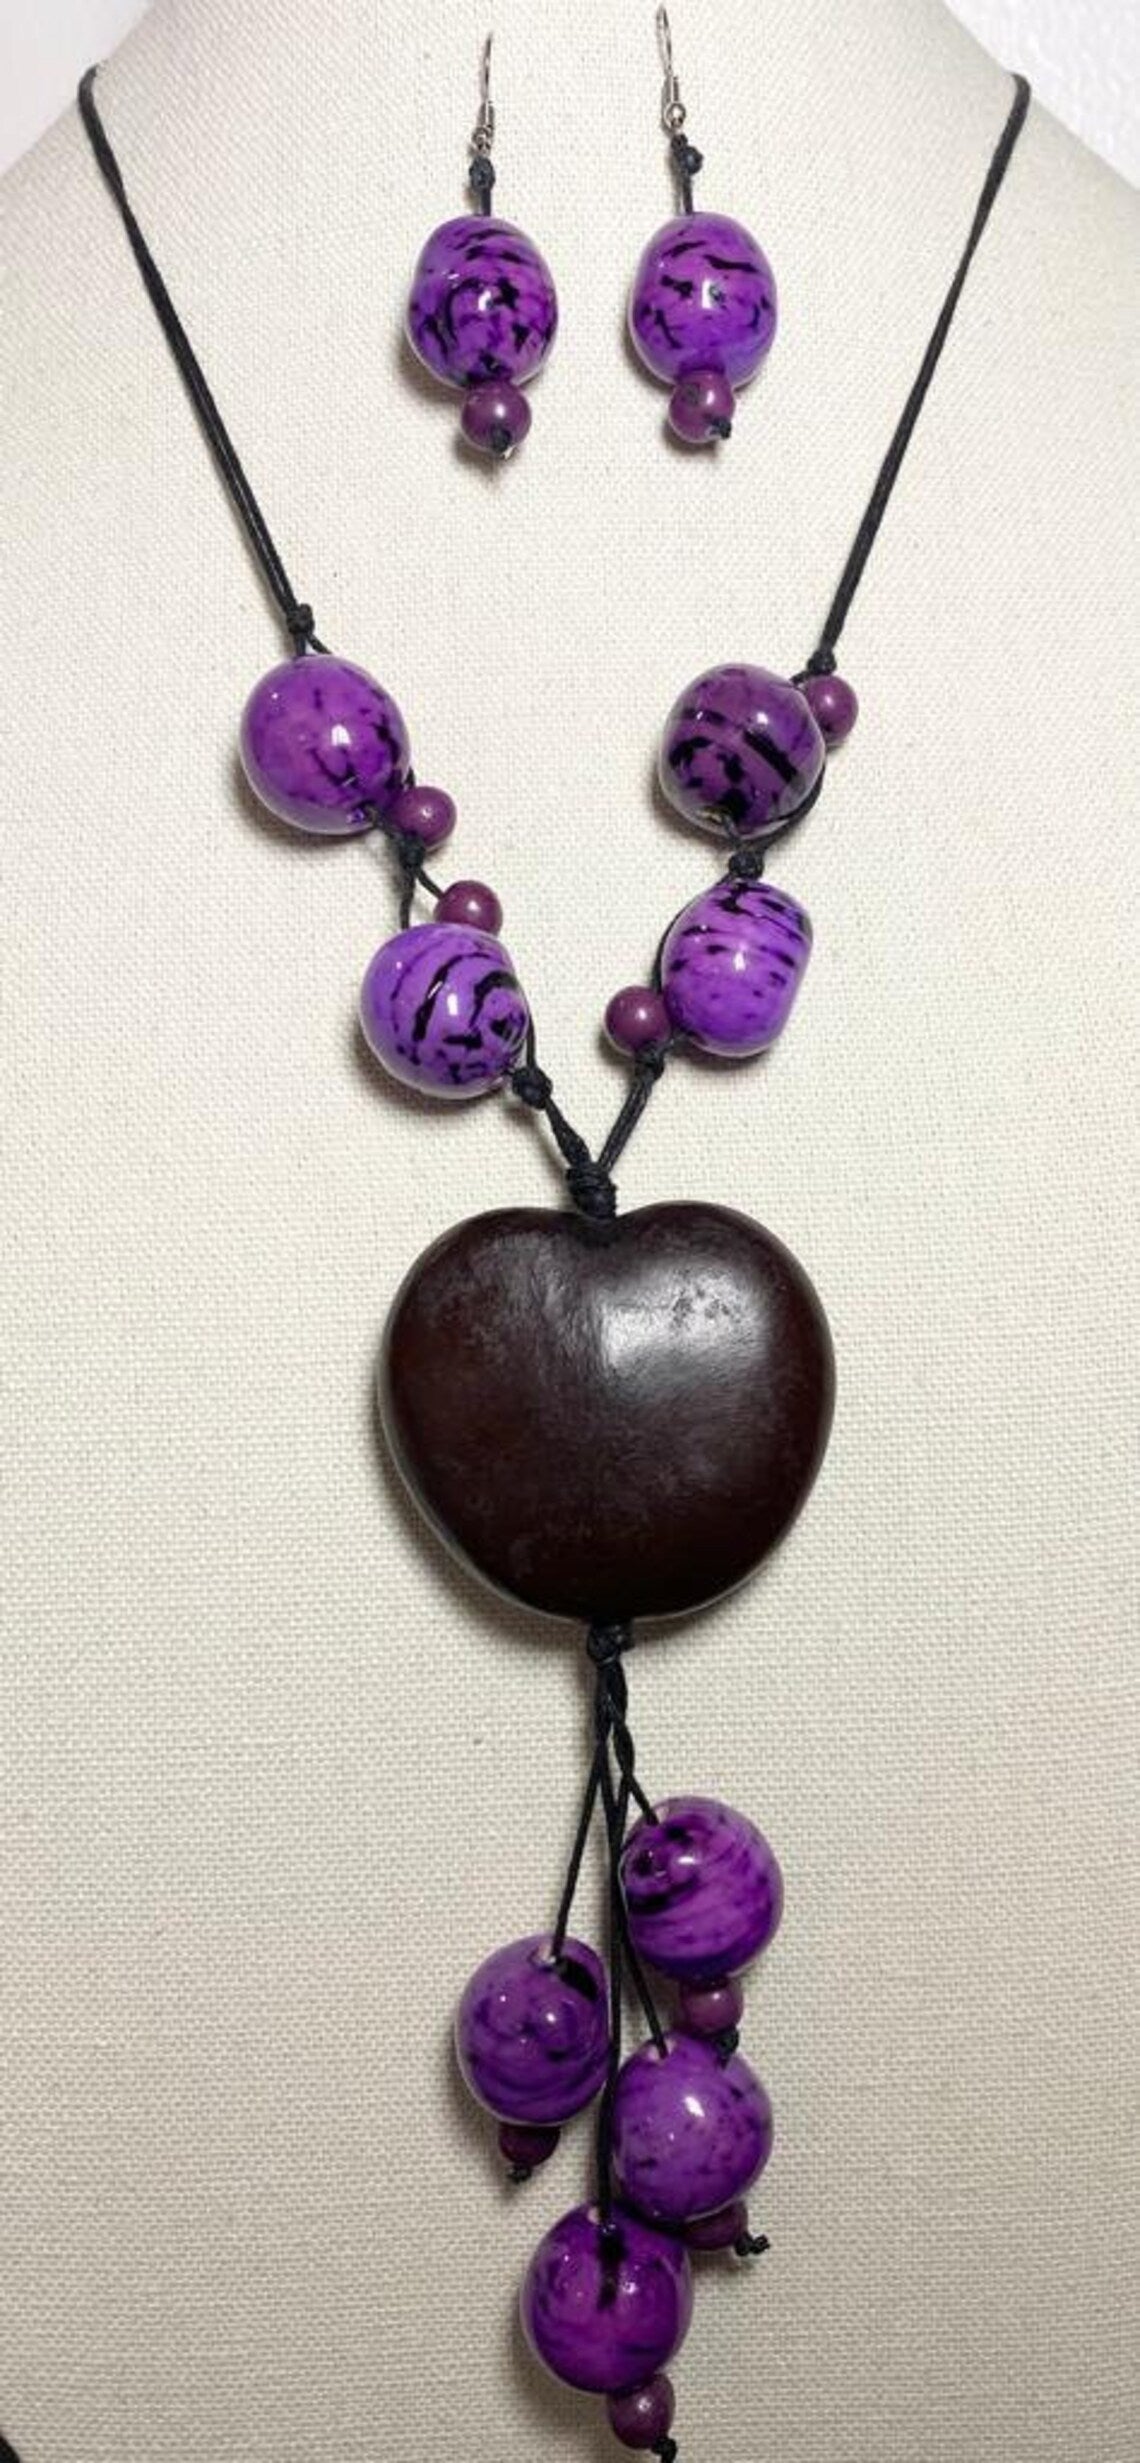 Tagua Pendant Necklace and Earrings Set in Purple Color